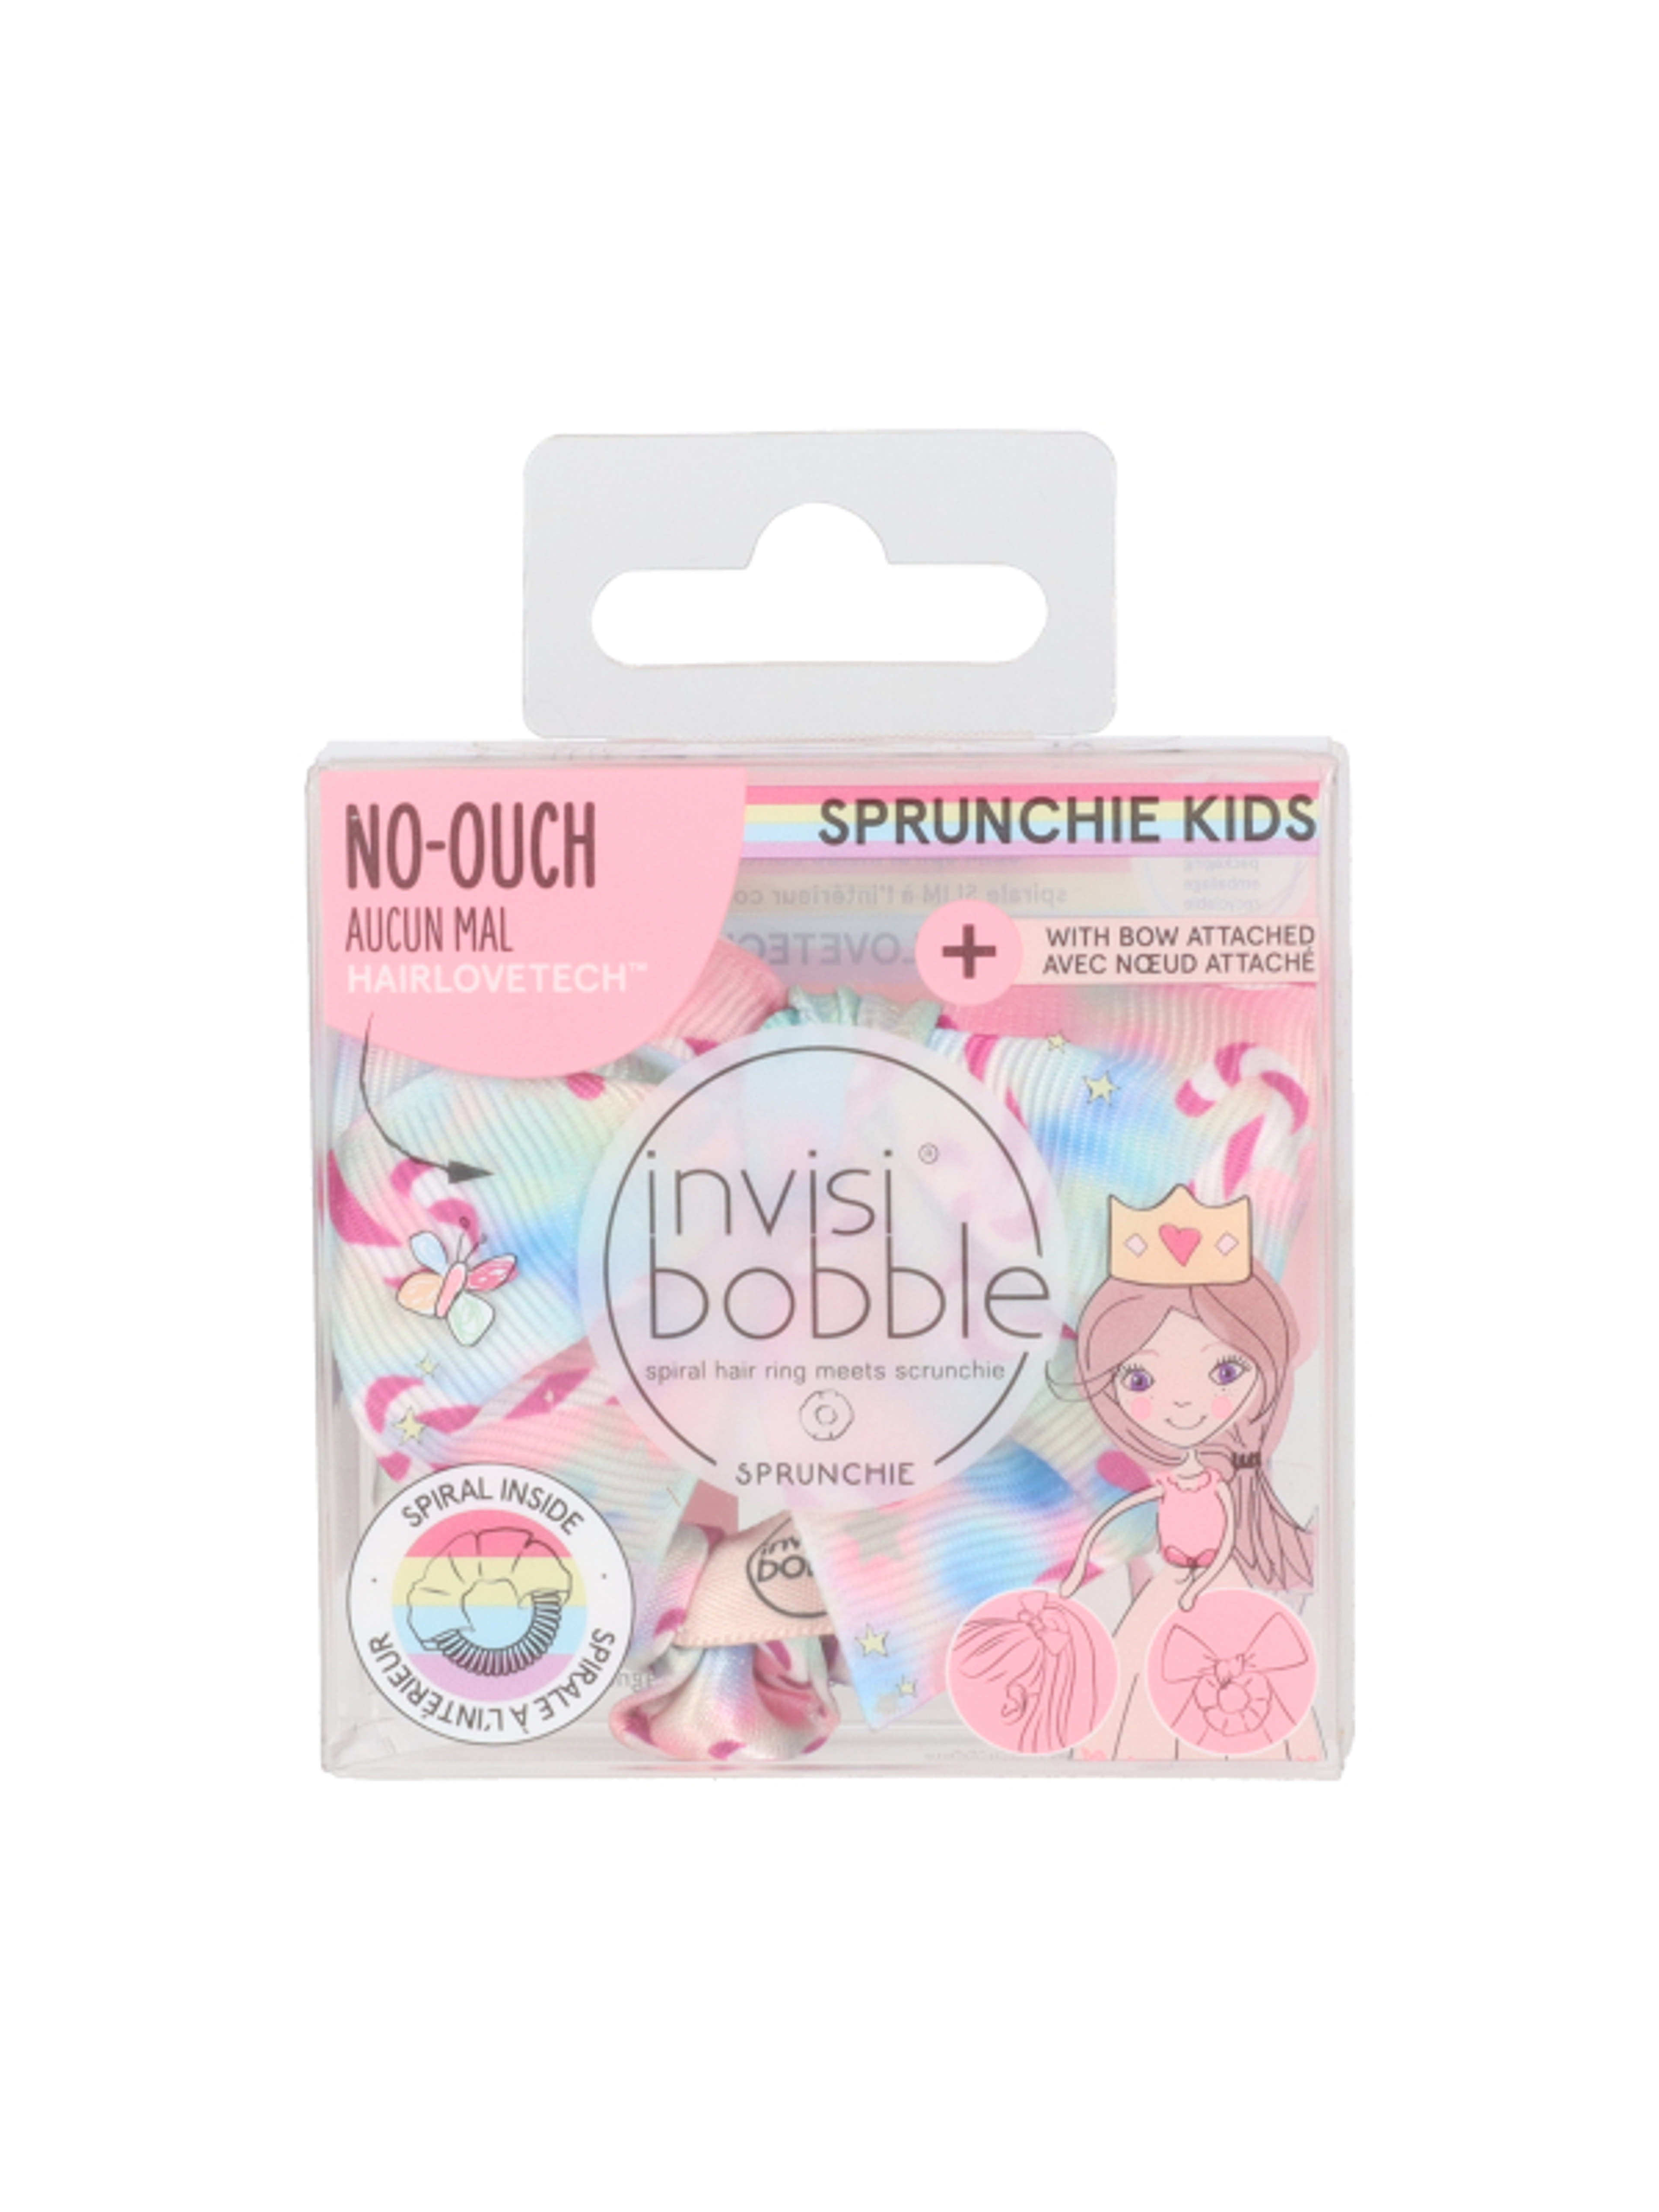 Invisibobble Sprunchie Kids Sweets For My Sweet masnis hajgumi - 1 db